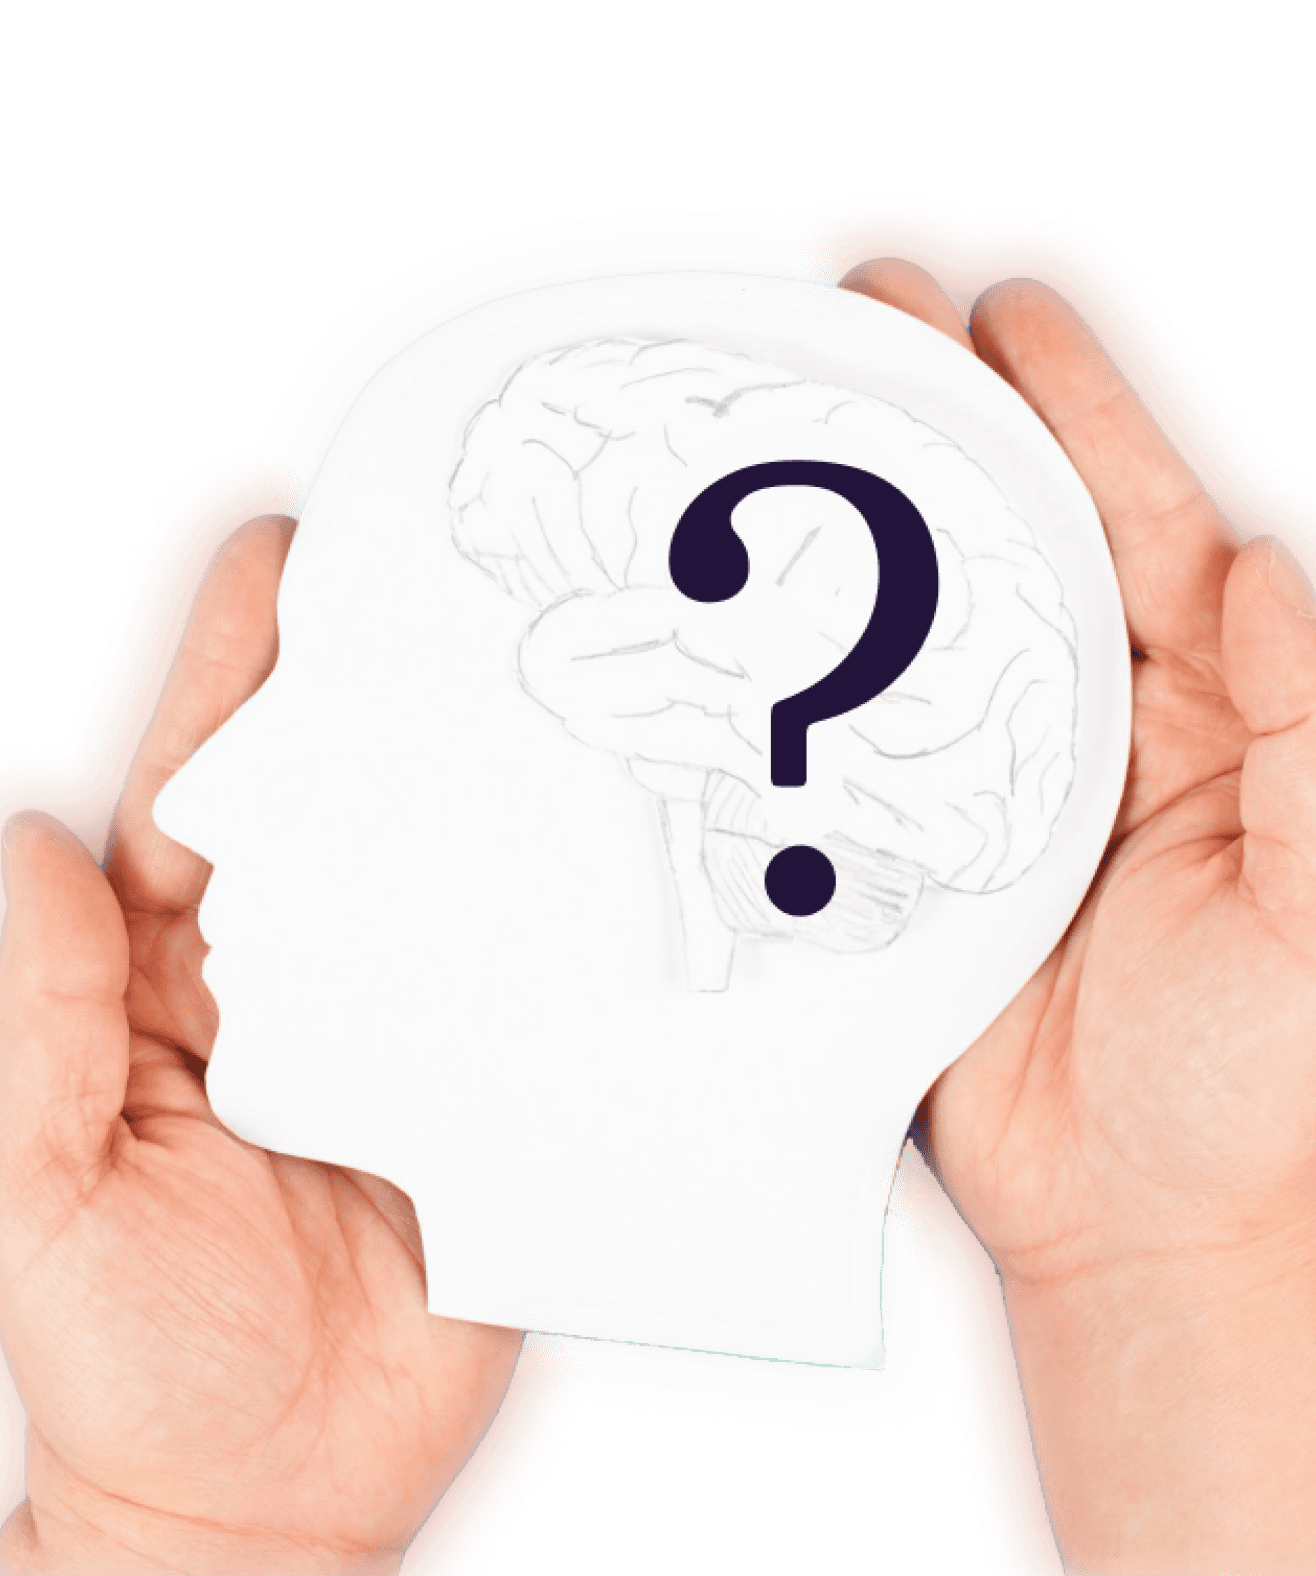 Hands holding a paper cutout of a head with a brain illustration inside and a question mark over the brain.